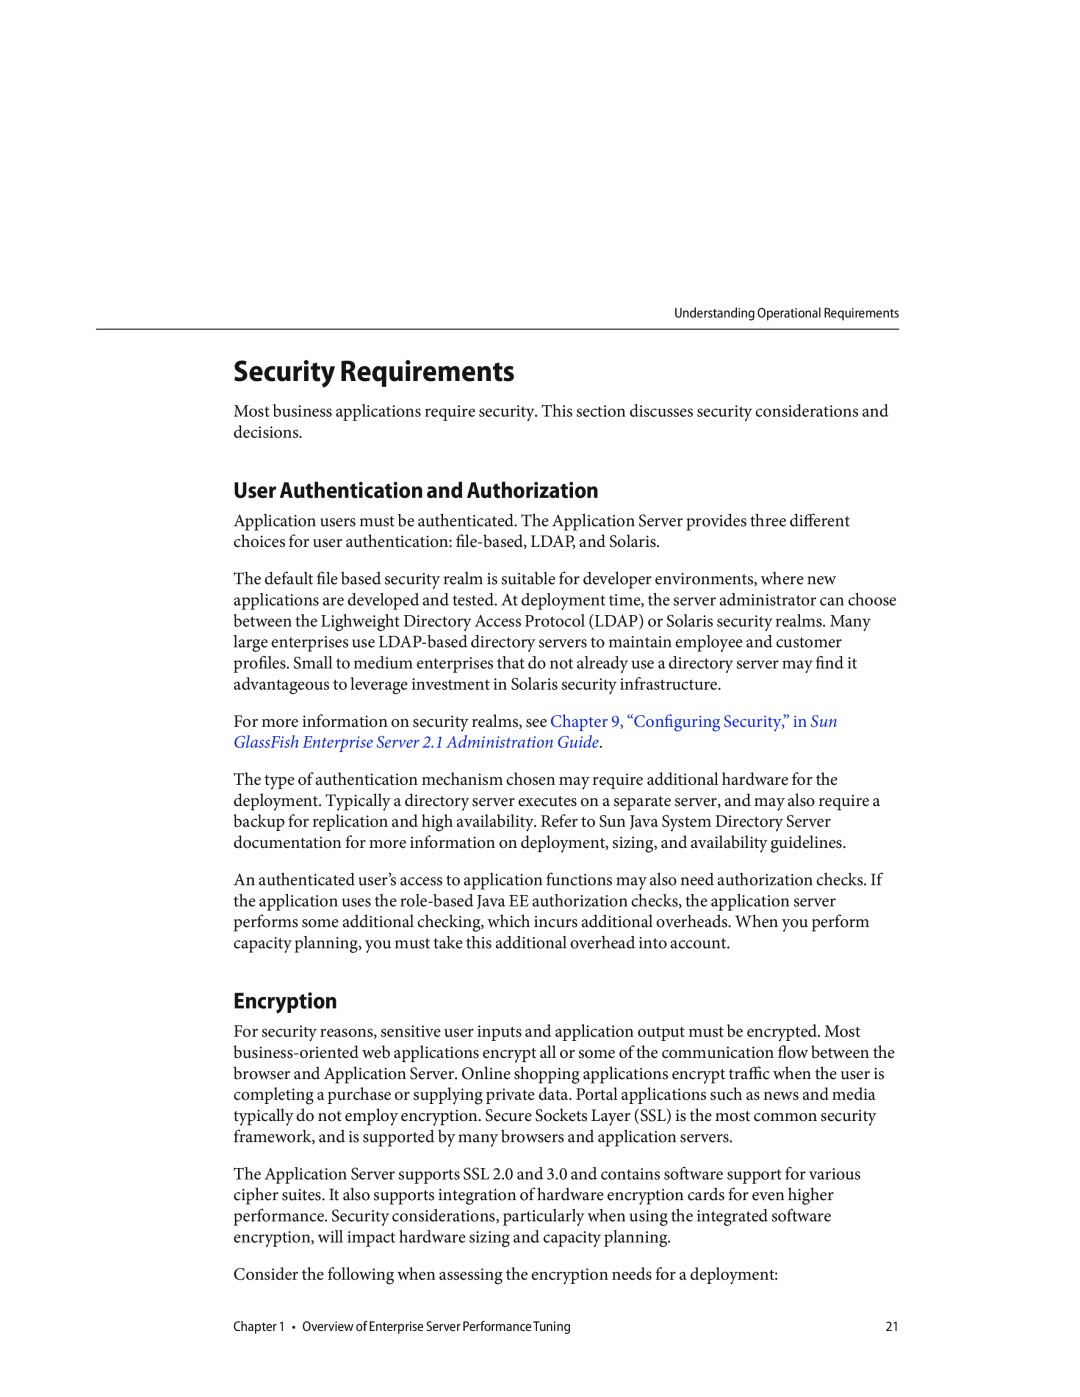 Sun Microsystems 820434310 manual Security Requirements, User Authentication and Authorization, Encryption 